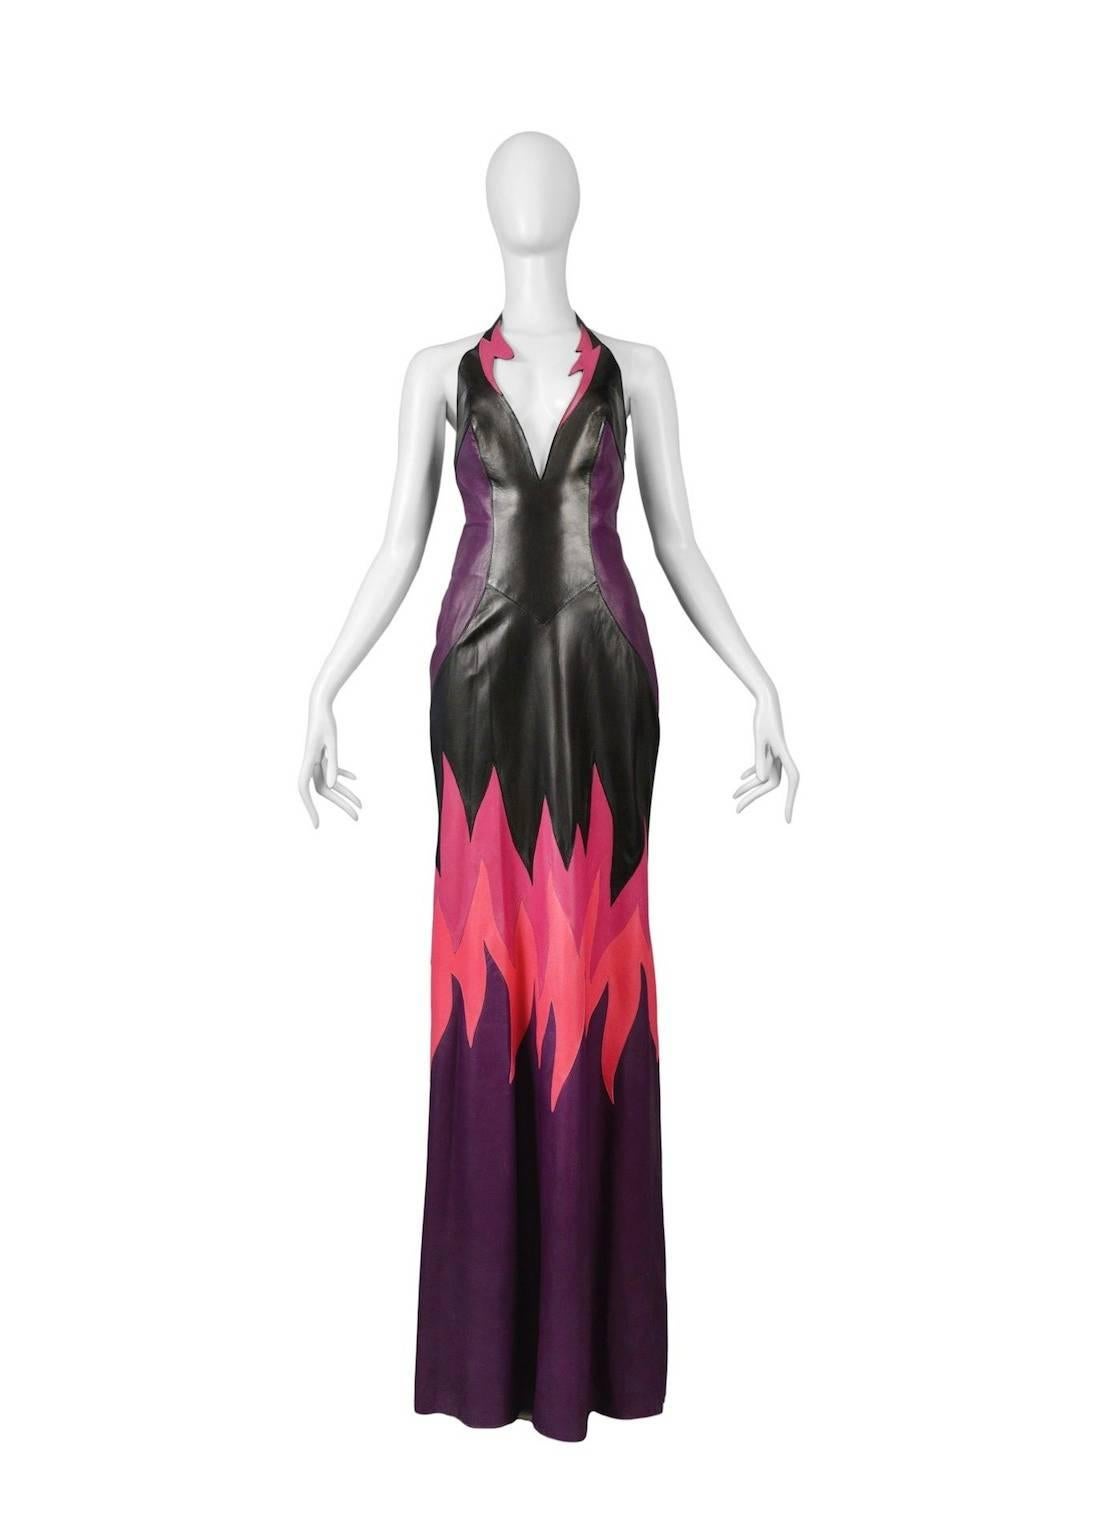 Vintage Thierry Mugler leather halter gown with colorful leather flame inserts. Fitted to perfection.